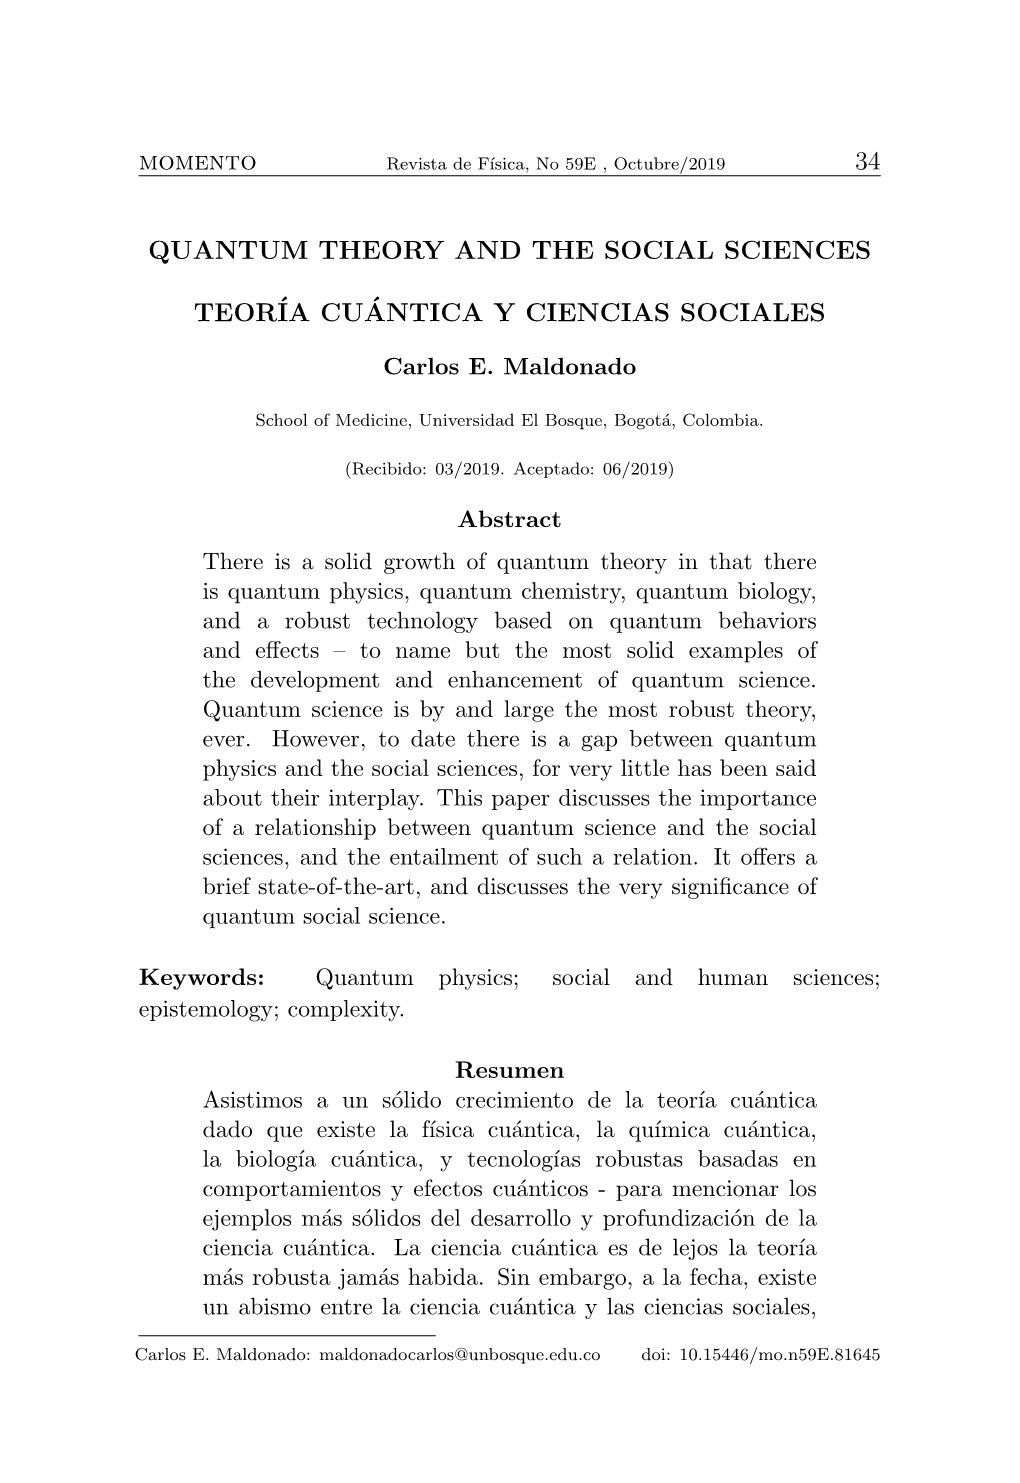 Momento 34 QUANTUM THEORY and the SOCIAL SCIENCES